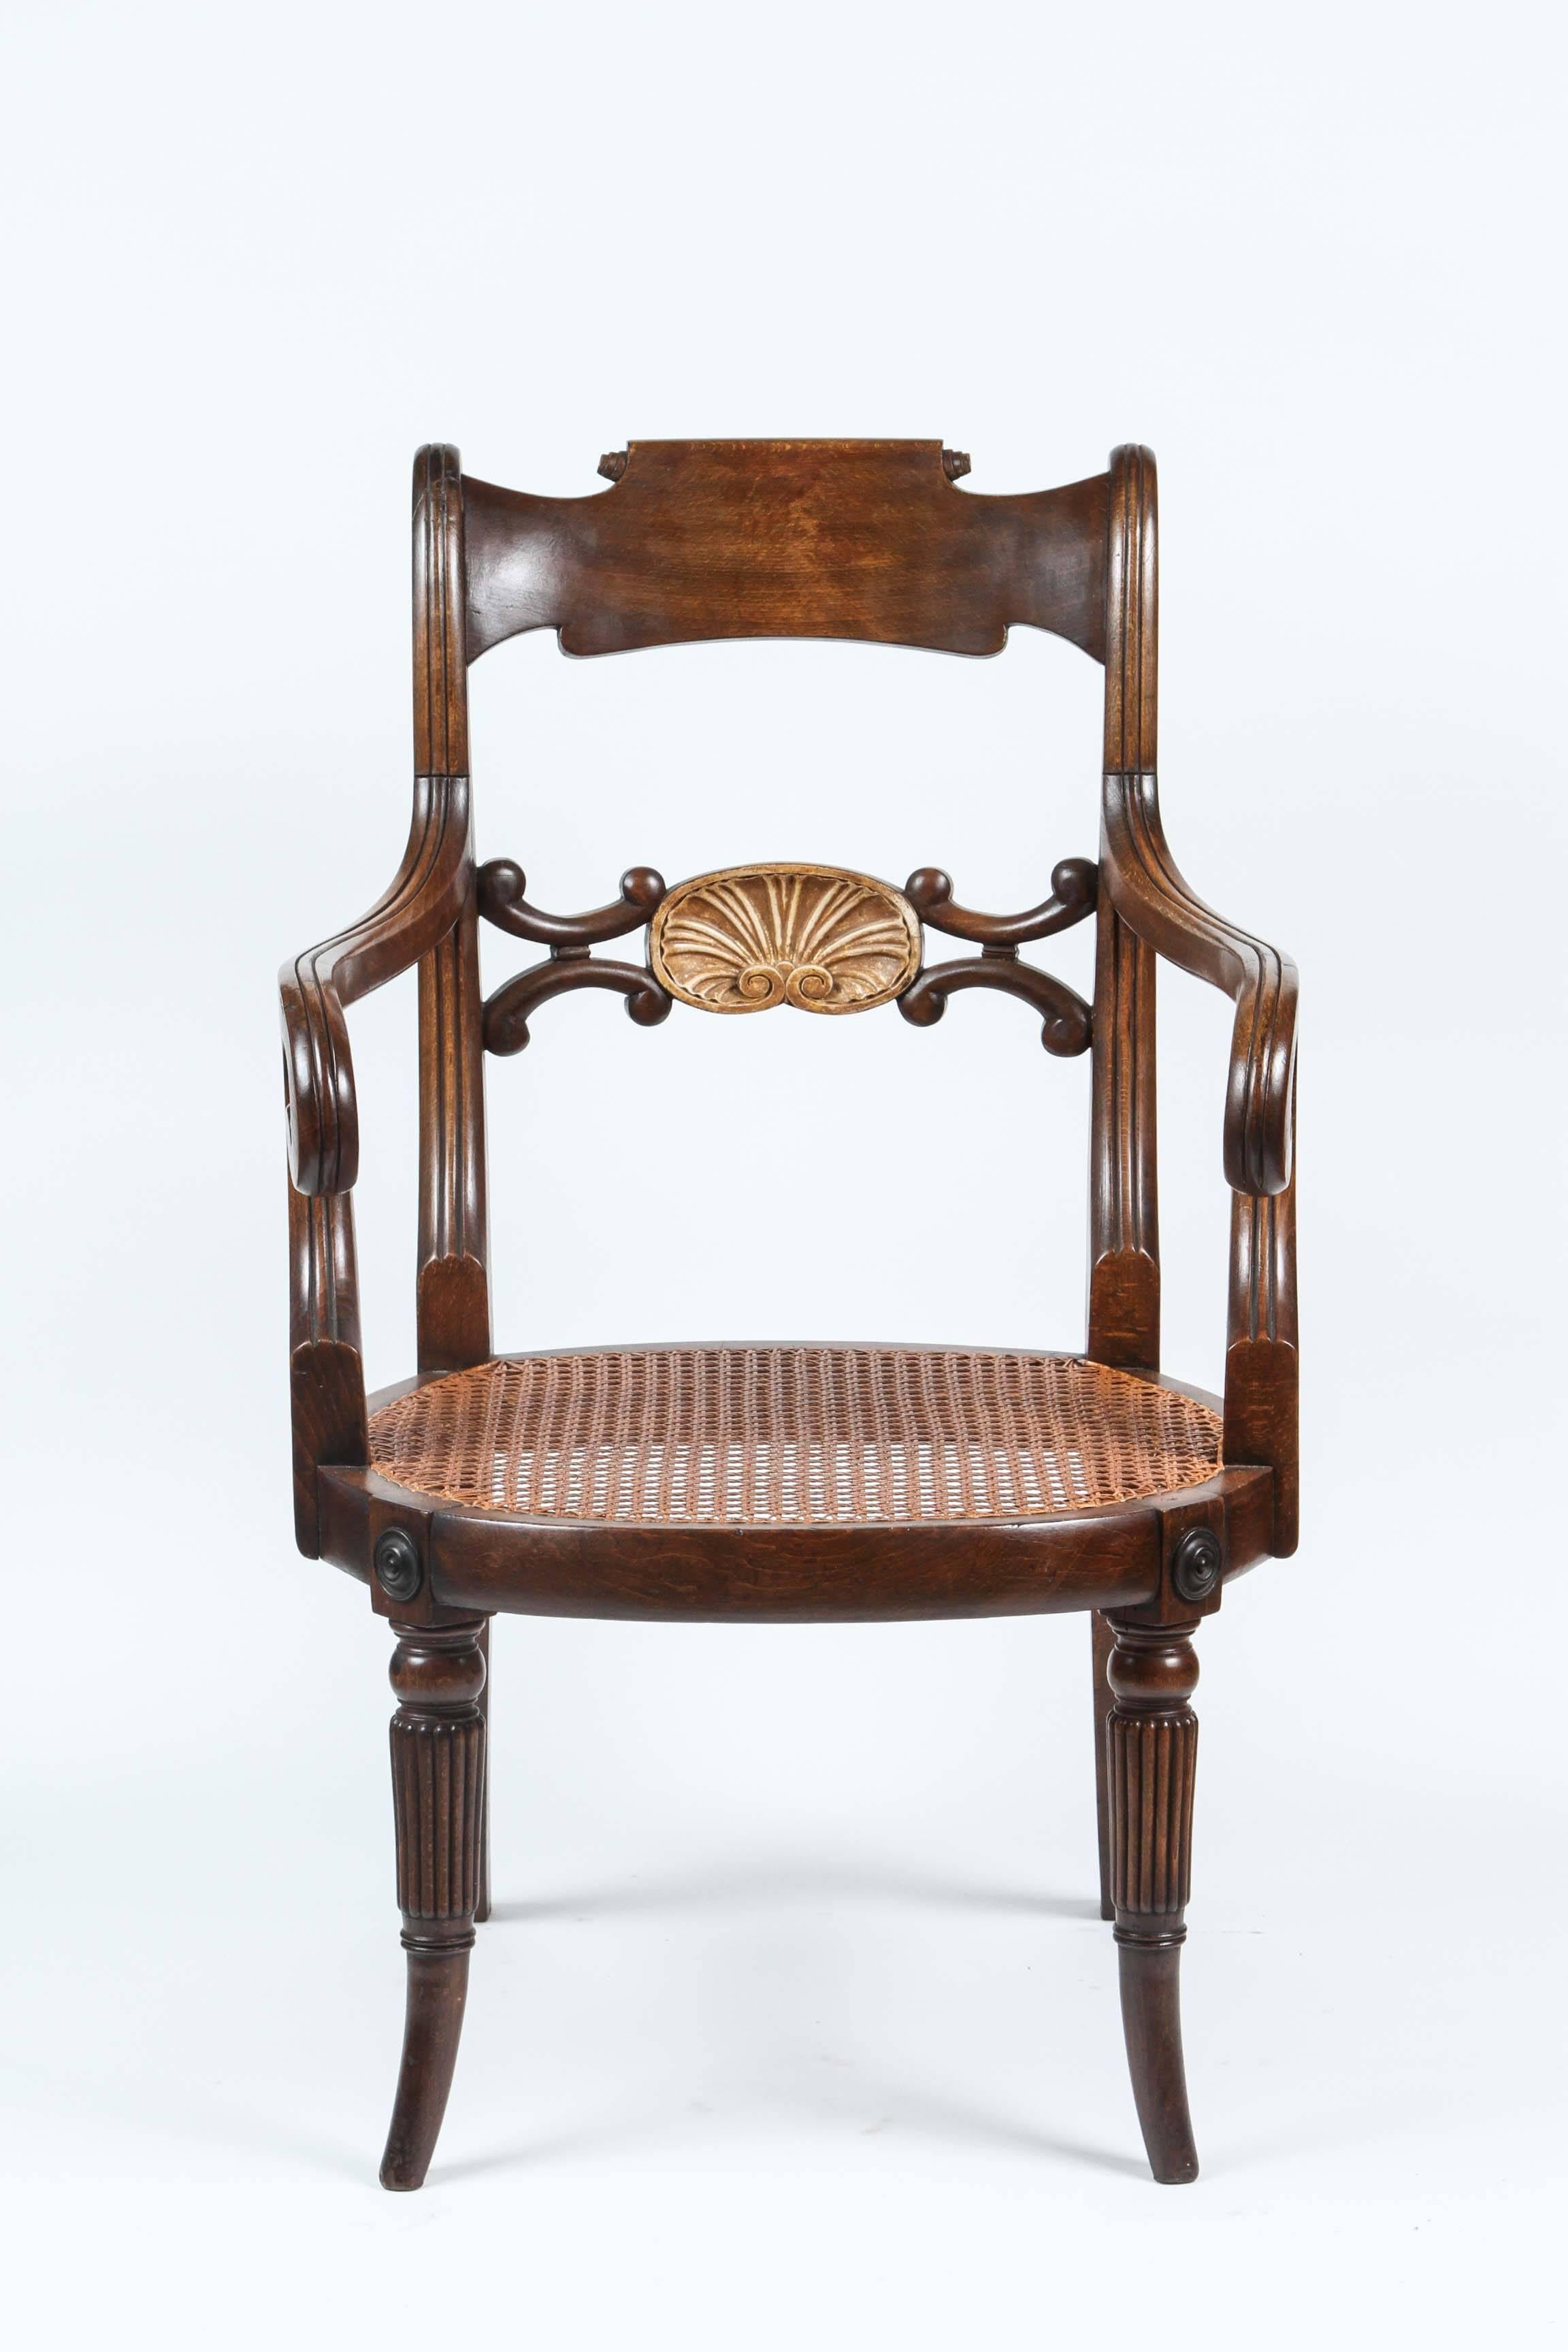 Pair of English regency over-scaled mahogany armchairs featuring a gilded shell carved back saber legs and scrolled arms, circa 1820. Seats are newly caned.